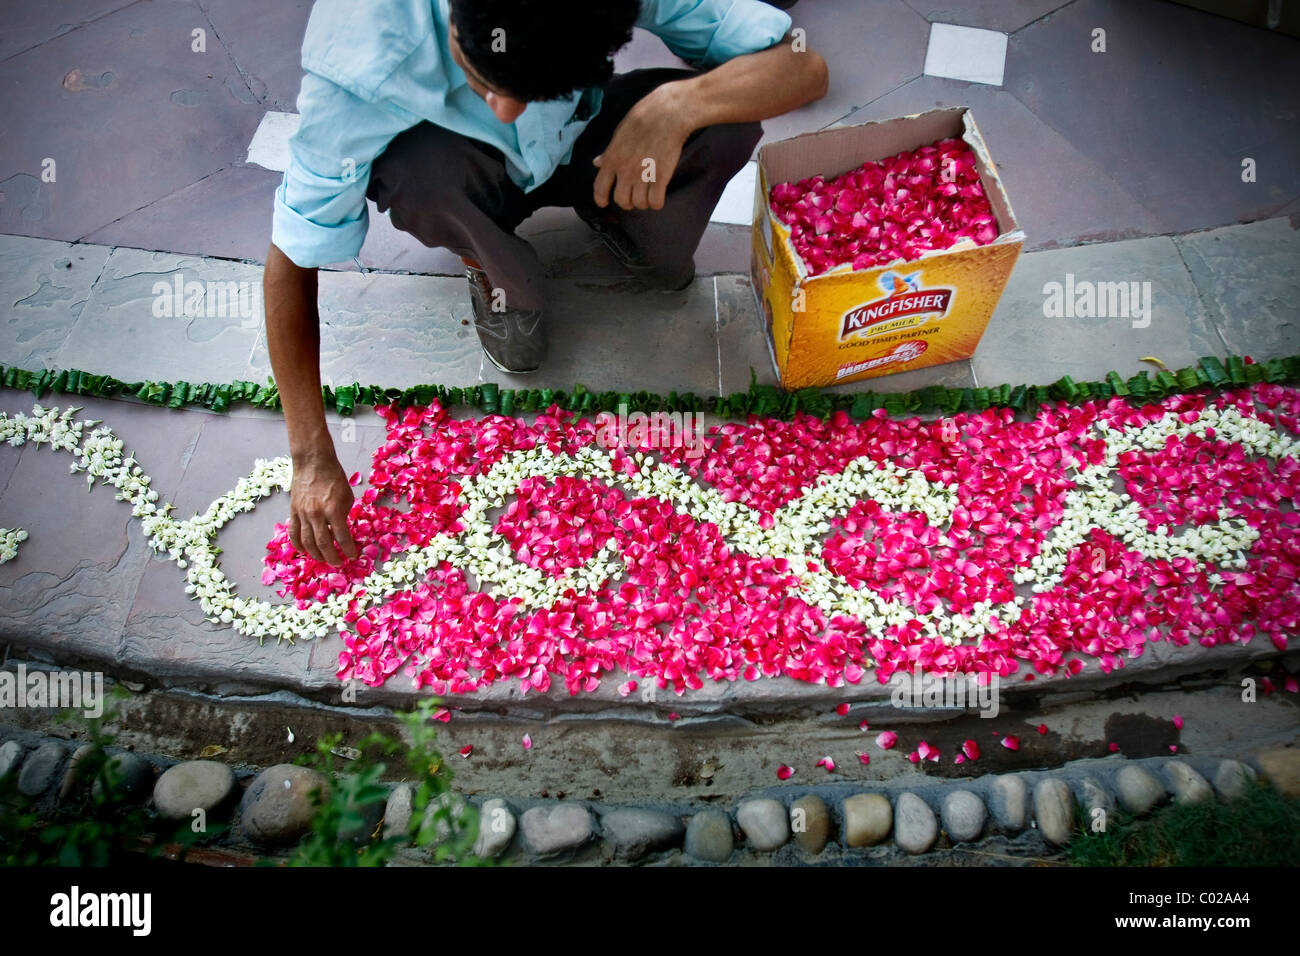 A man prepares flower ornaments ahead of an Indian wedding in New Delhi in India. Stock Photo